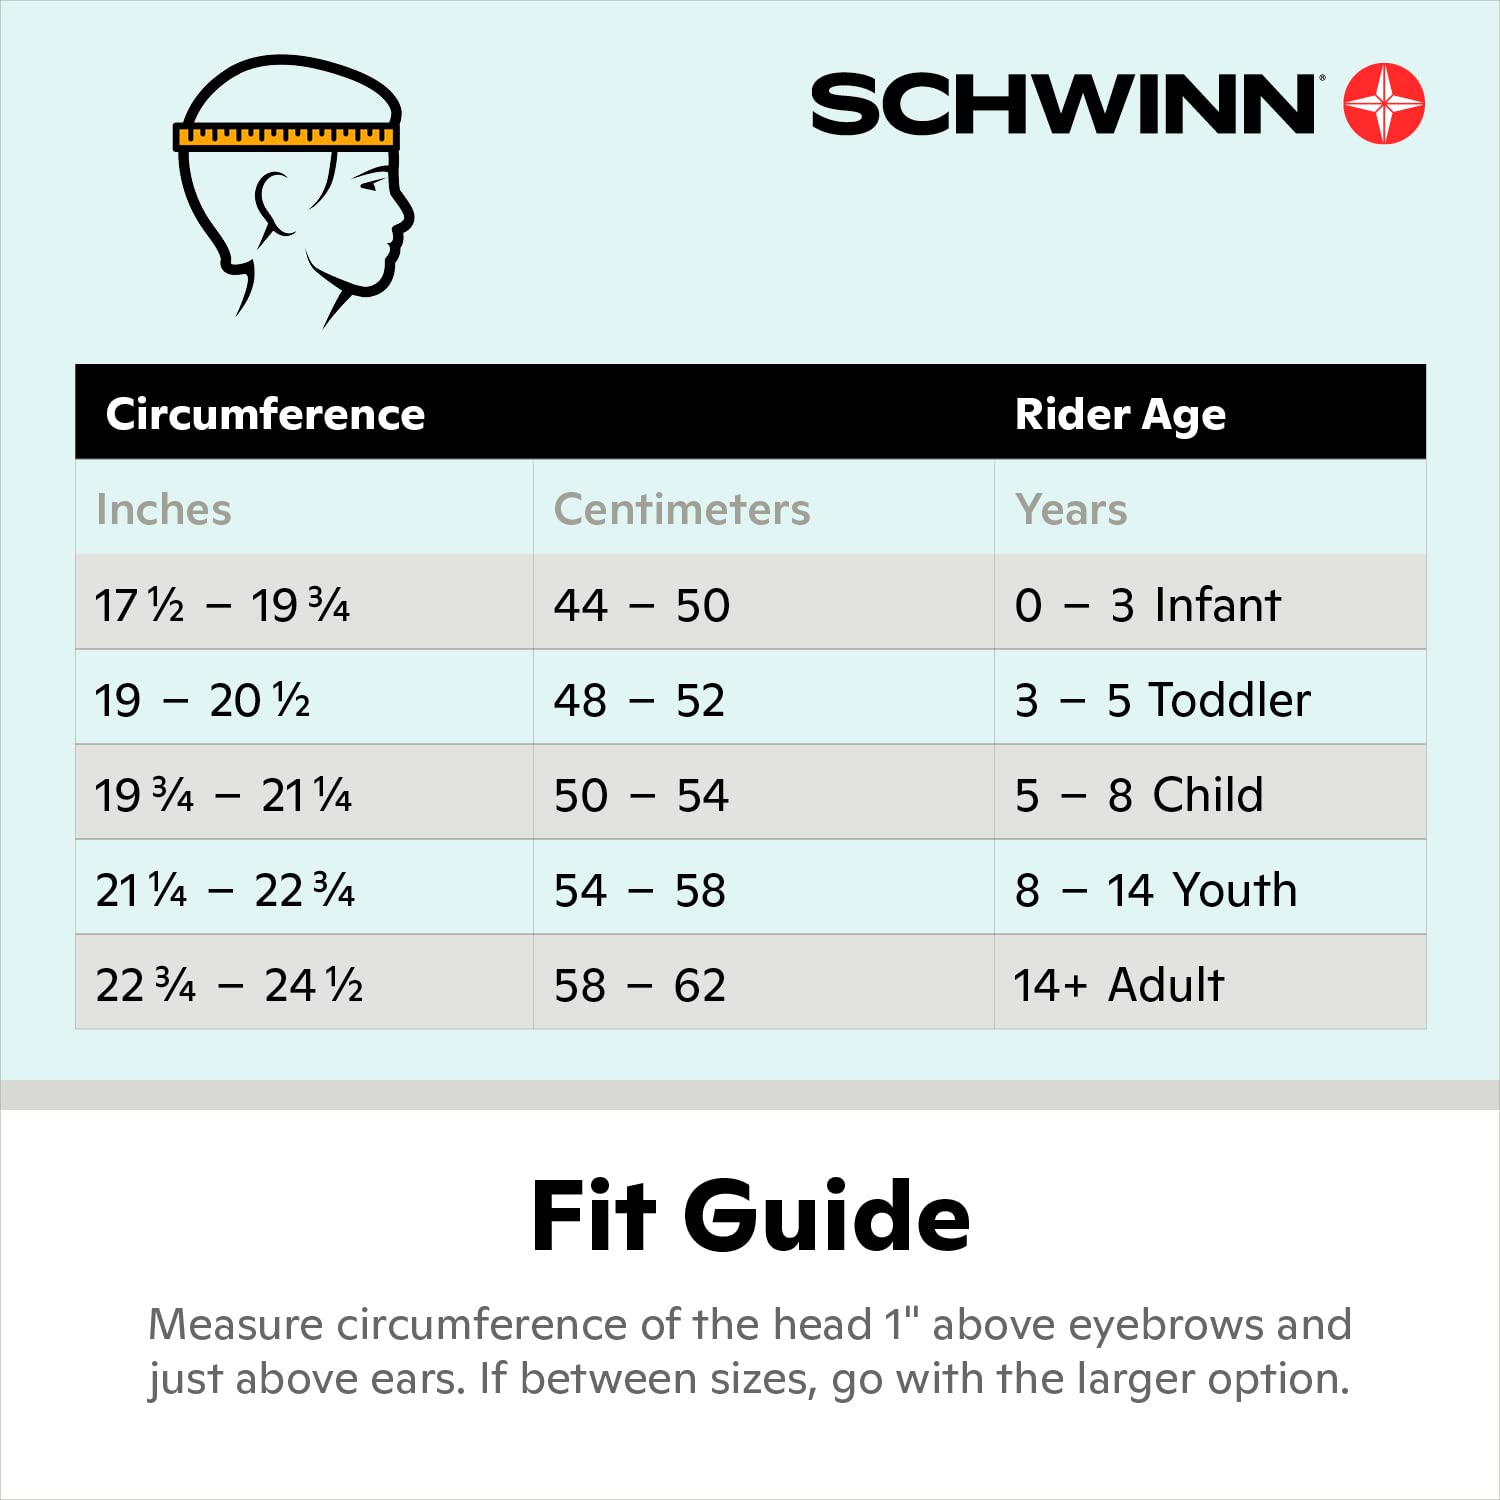 Schwinn Kids Bike Helmet with 3D Character Features, Age 0-3 Years Old, Infant and Toddler Sizes, Girls and Boys Suggested Fit 44-52 cm